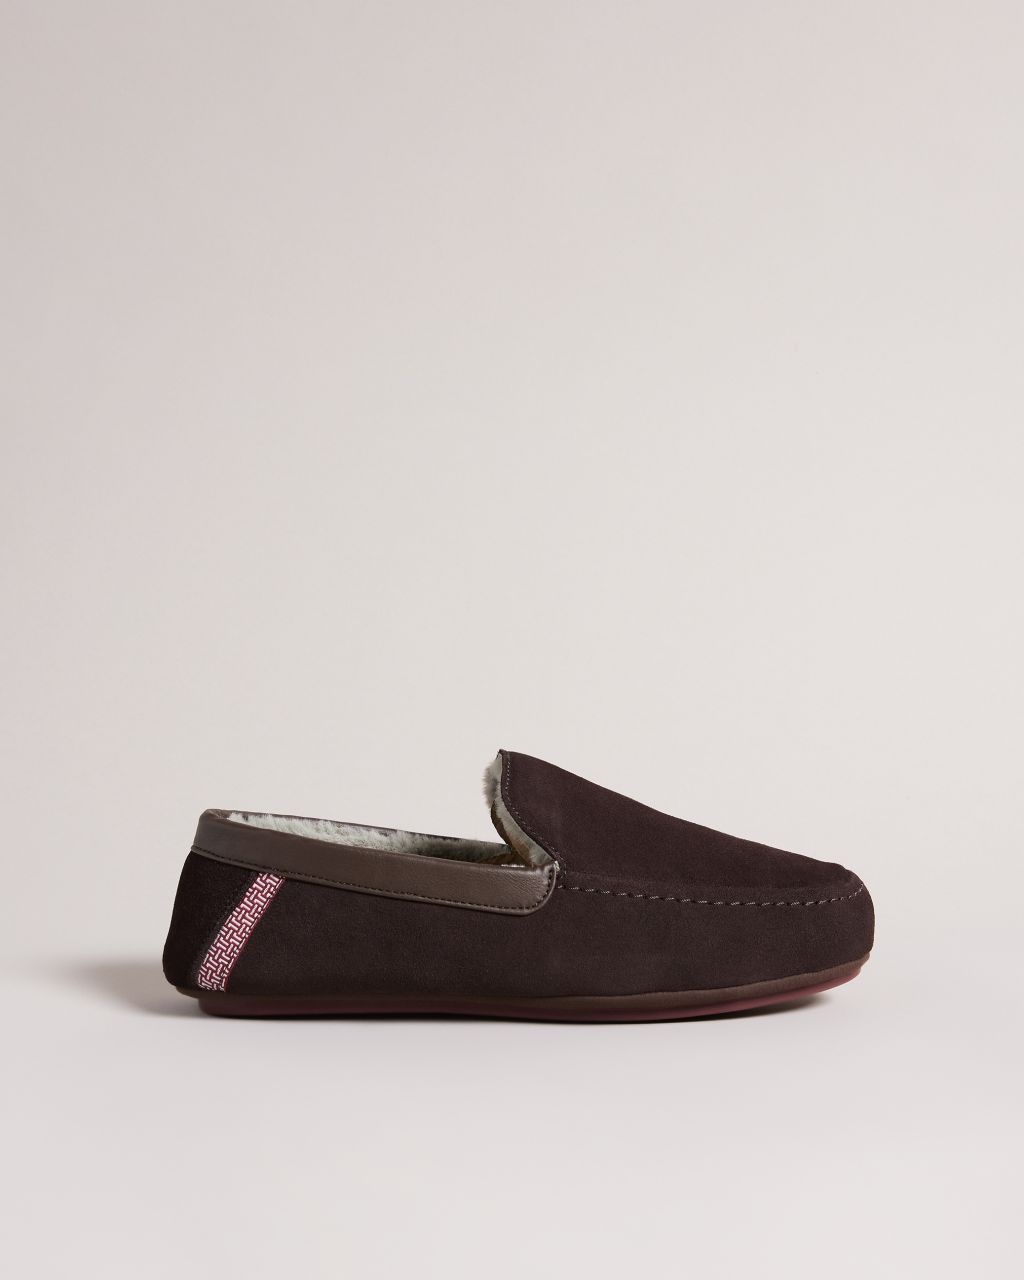 Ted Baker Men's Moccasin Slippers in Brown, Vallant, Leather